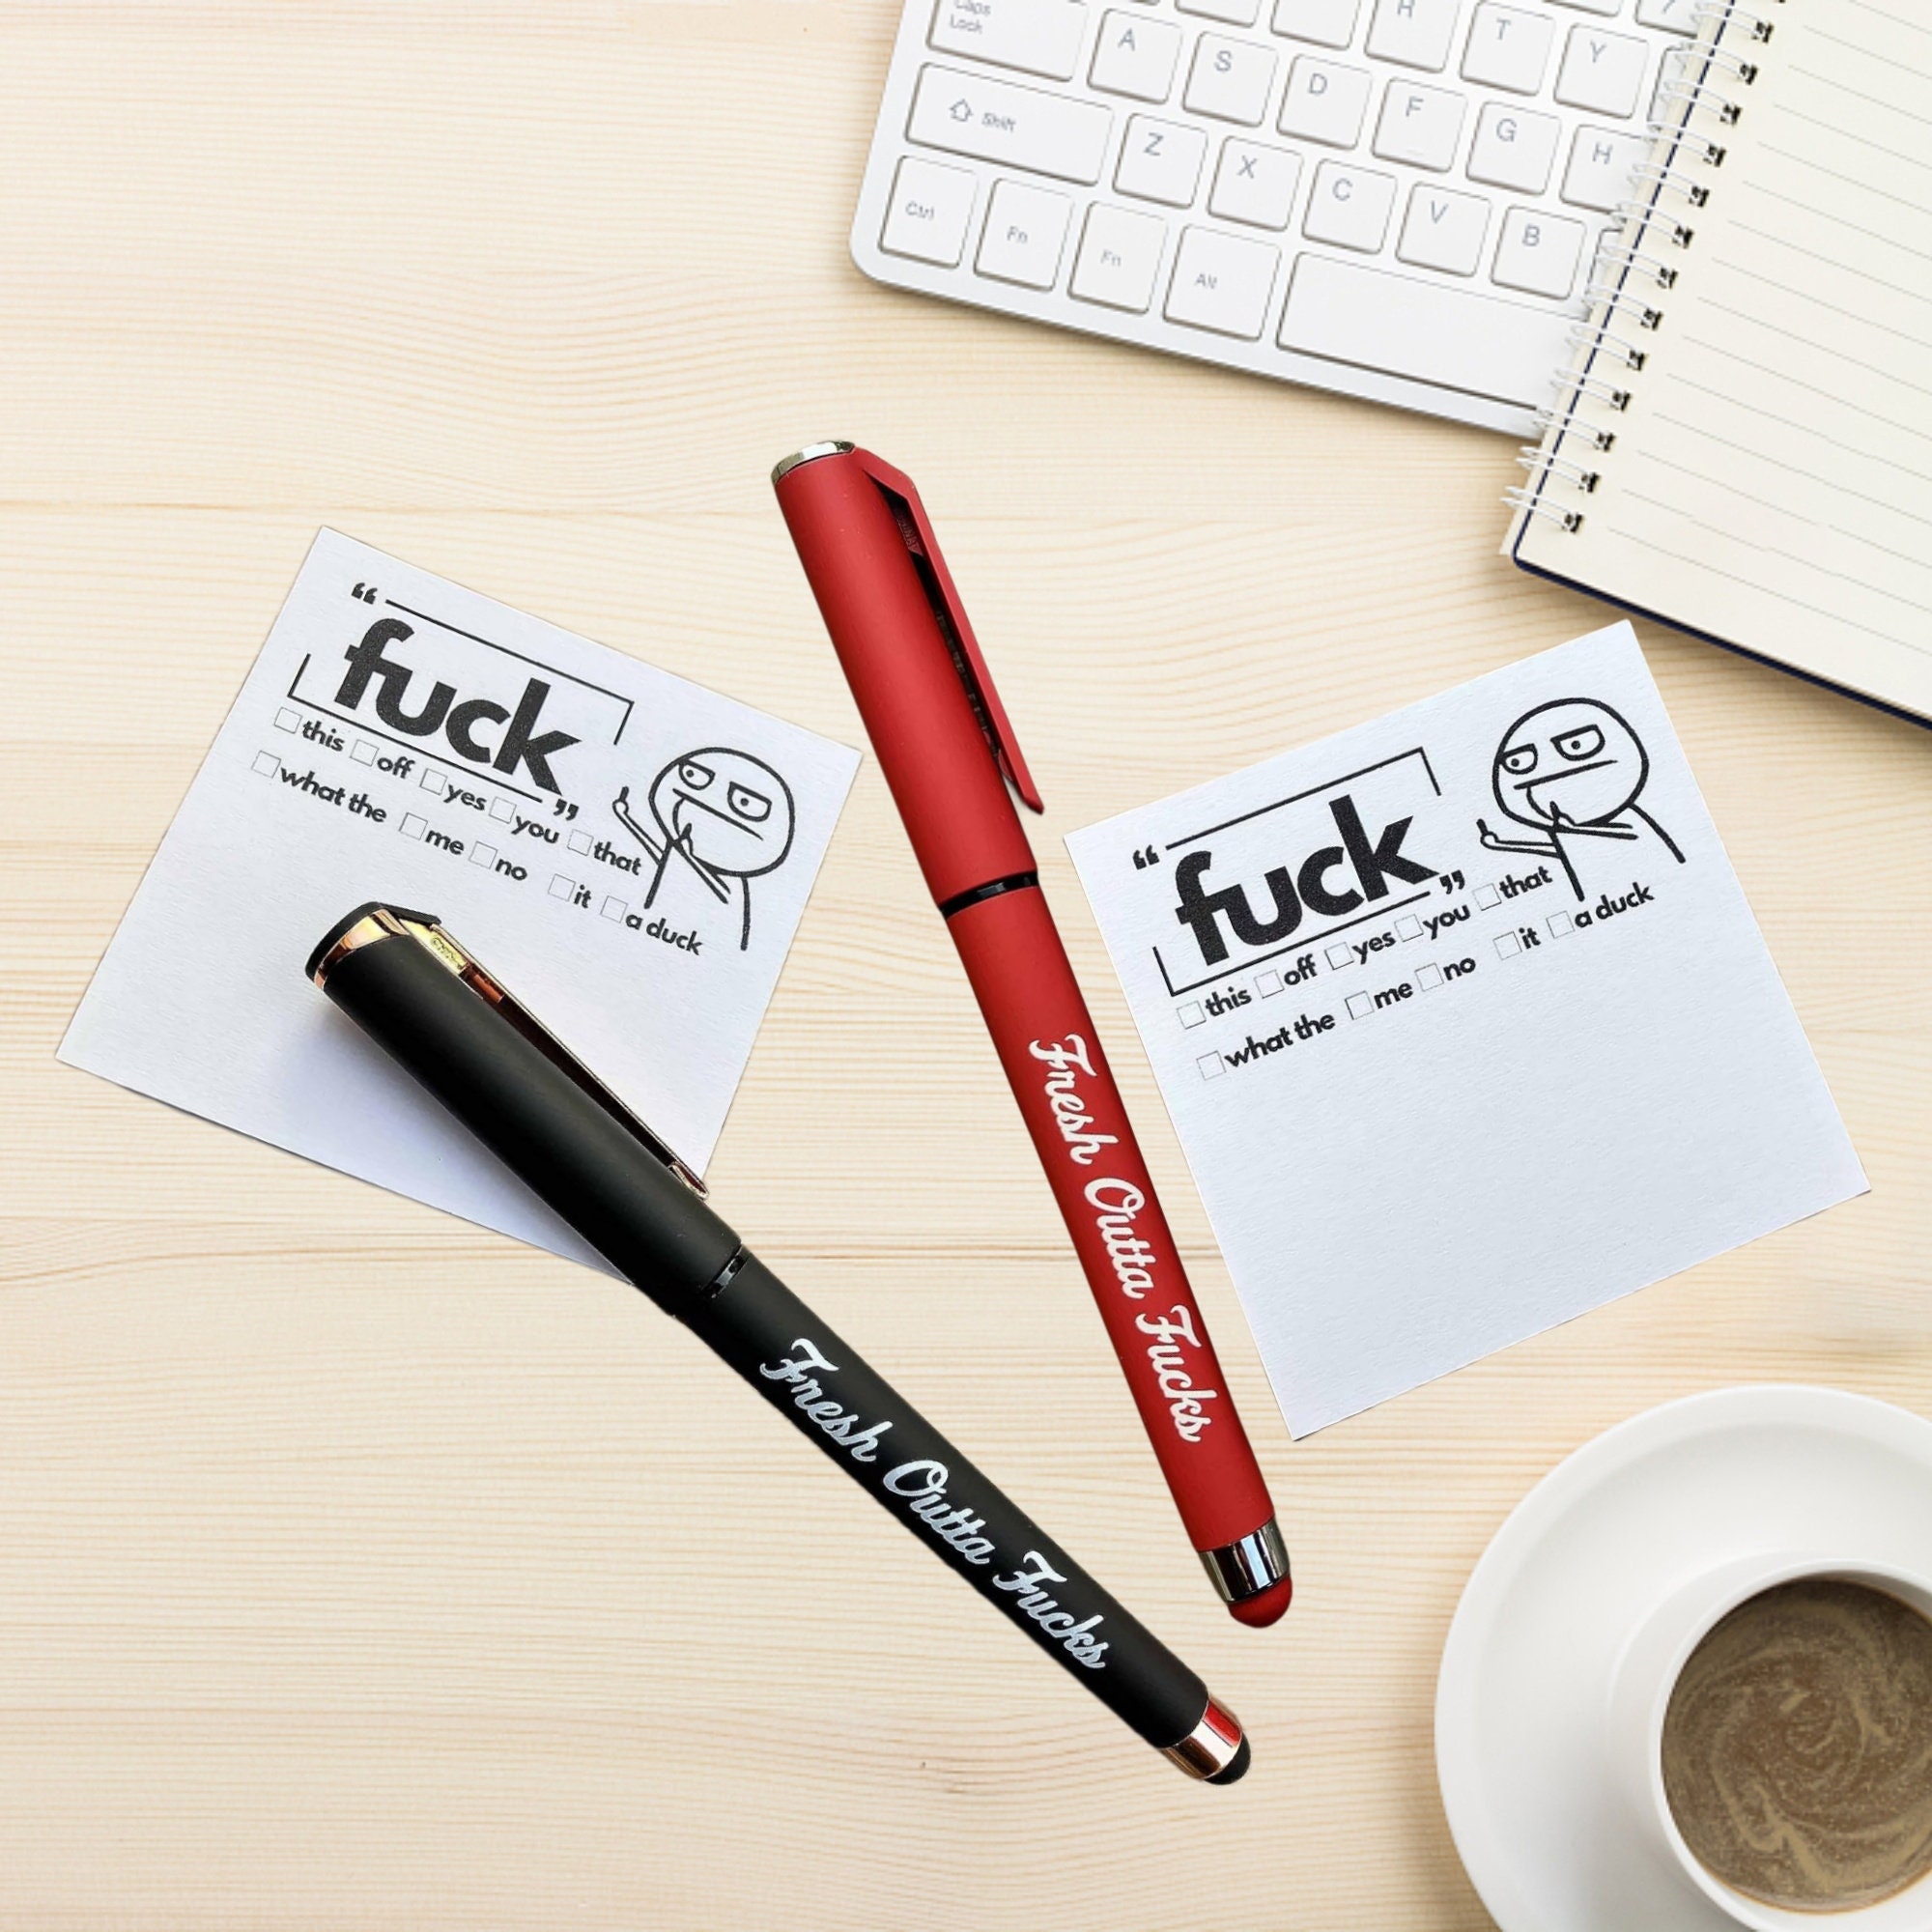 Fresh Outta Fucks Pad and Pen, Funny Fuck Pens, Satirical Spoof Sticky  Notes and Pens - Novelty Office Supplies Desktop Accessories Make Unique  Gifts